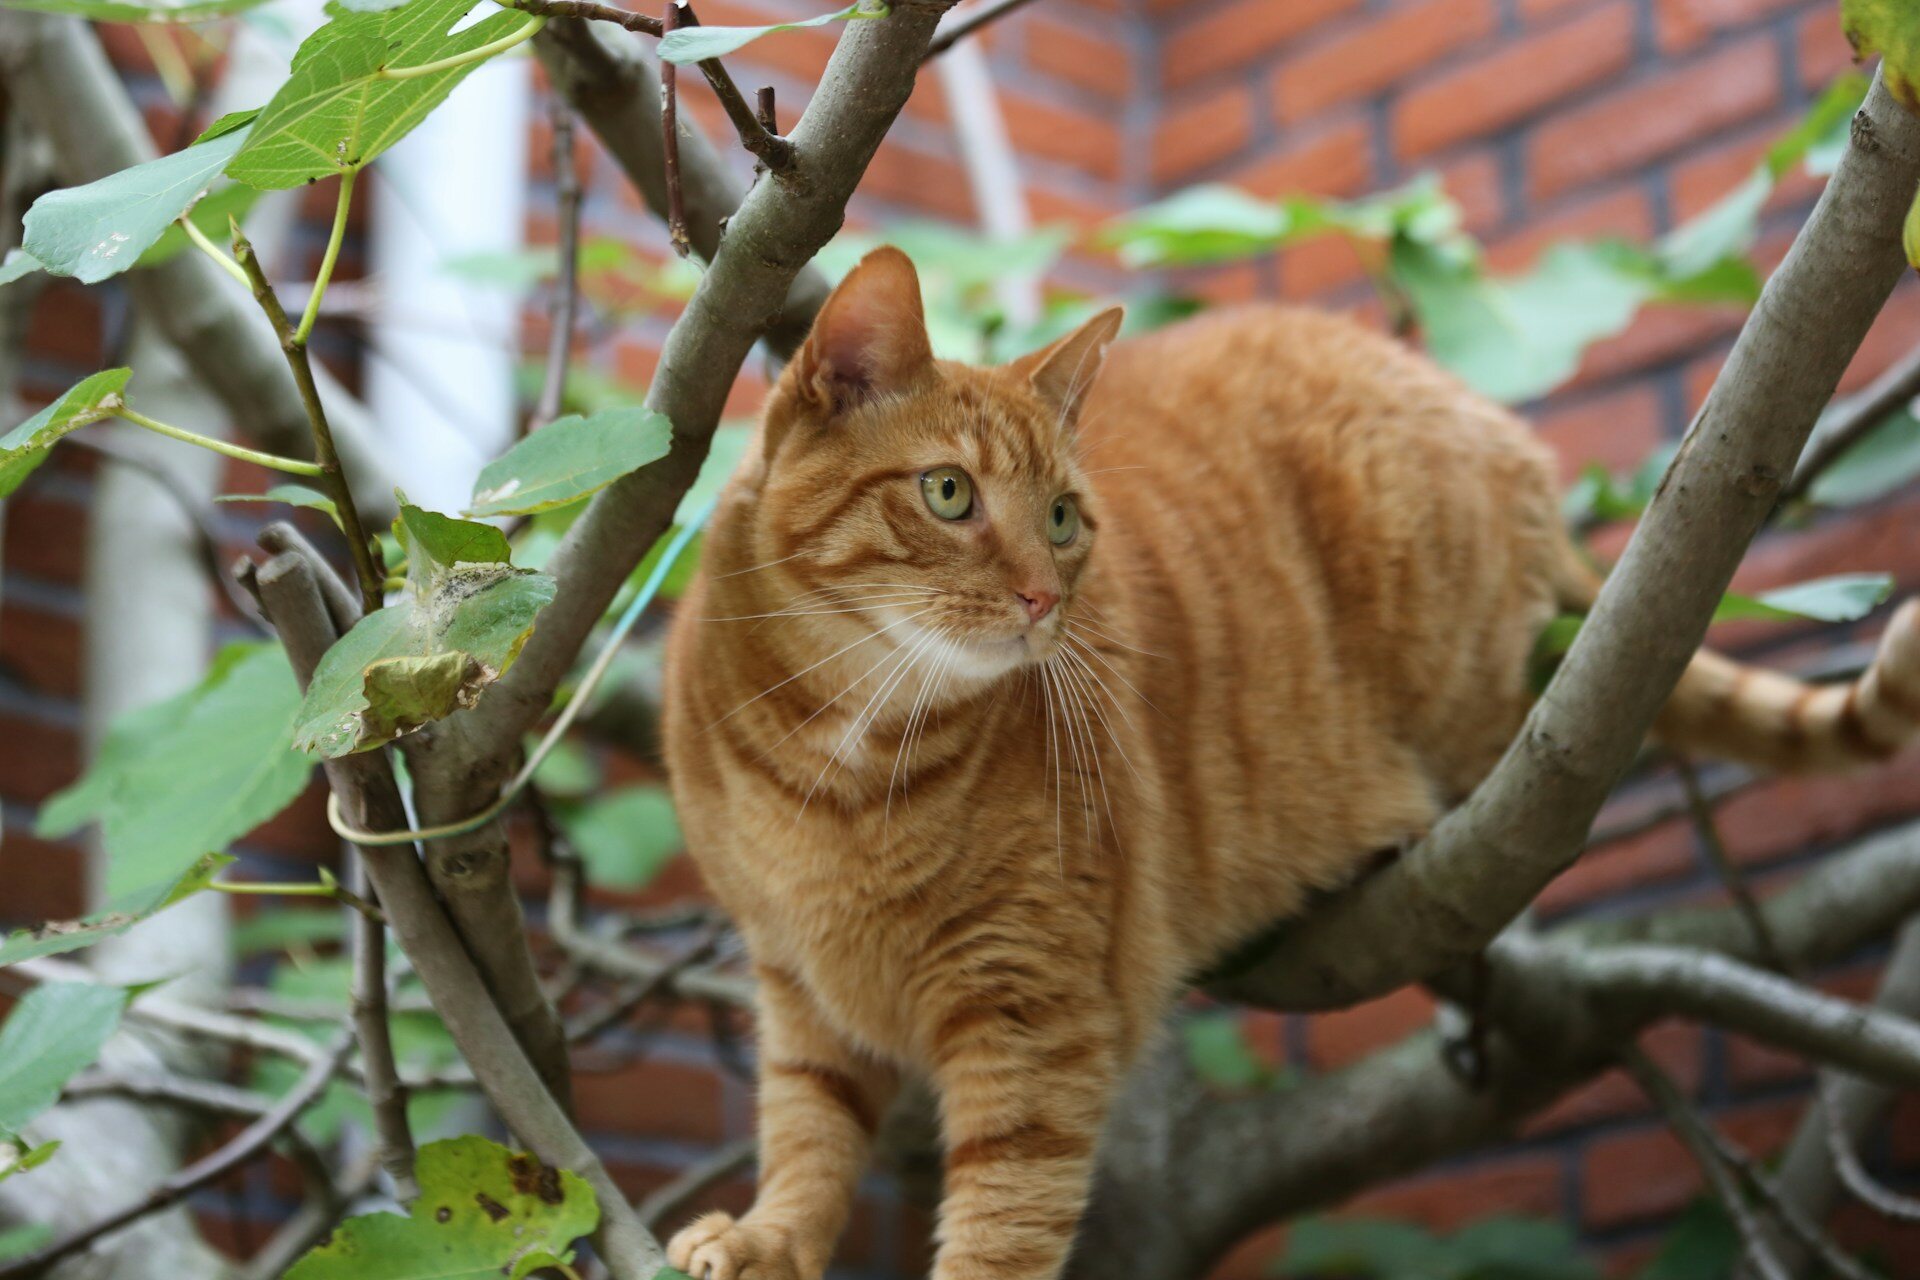 A cat sitting by the branches of a tree